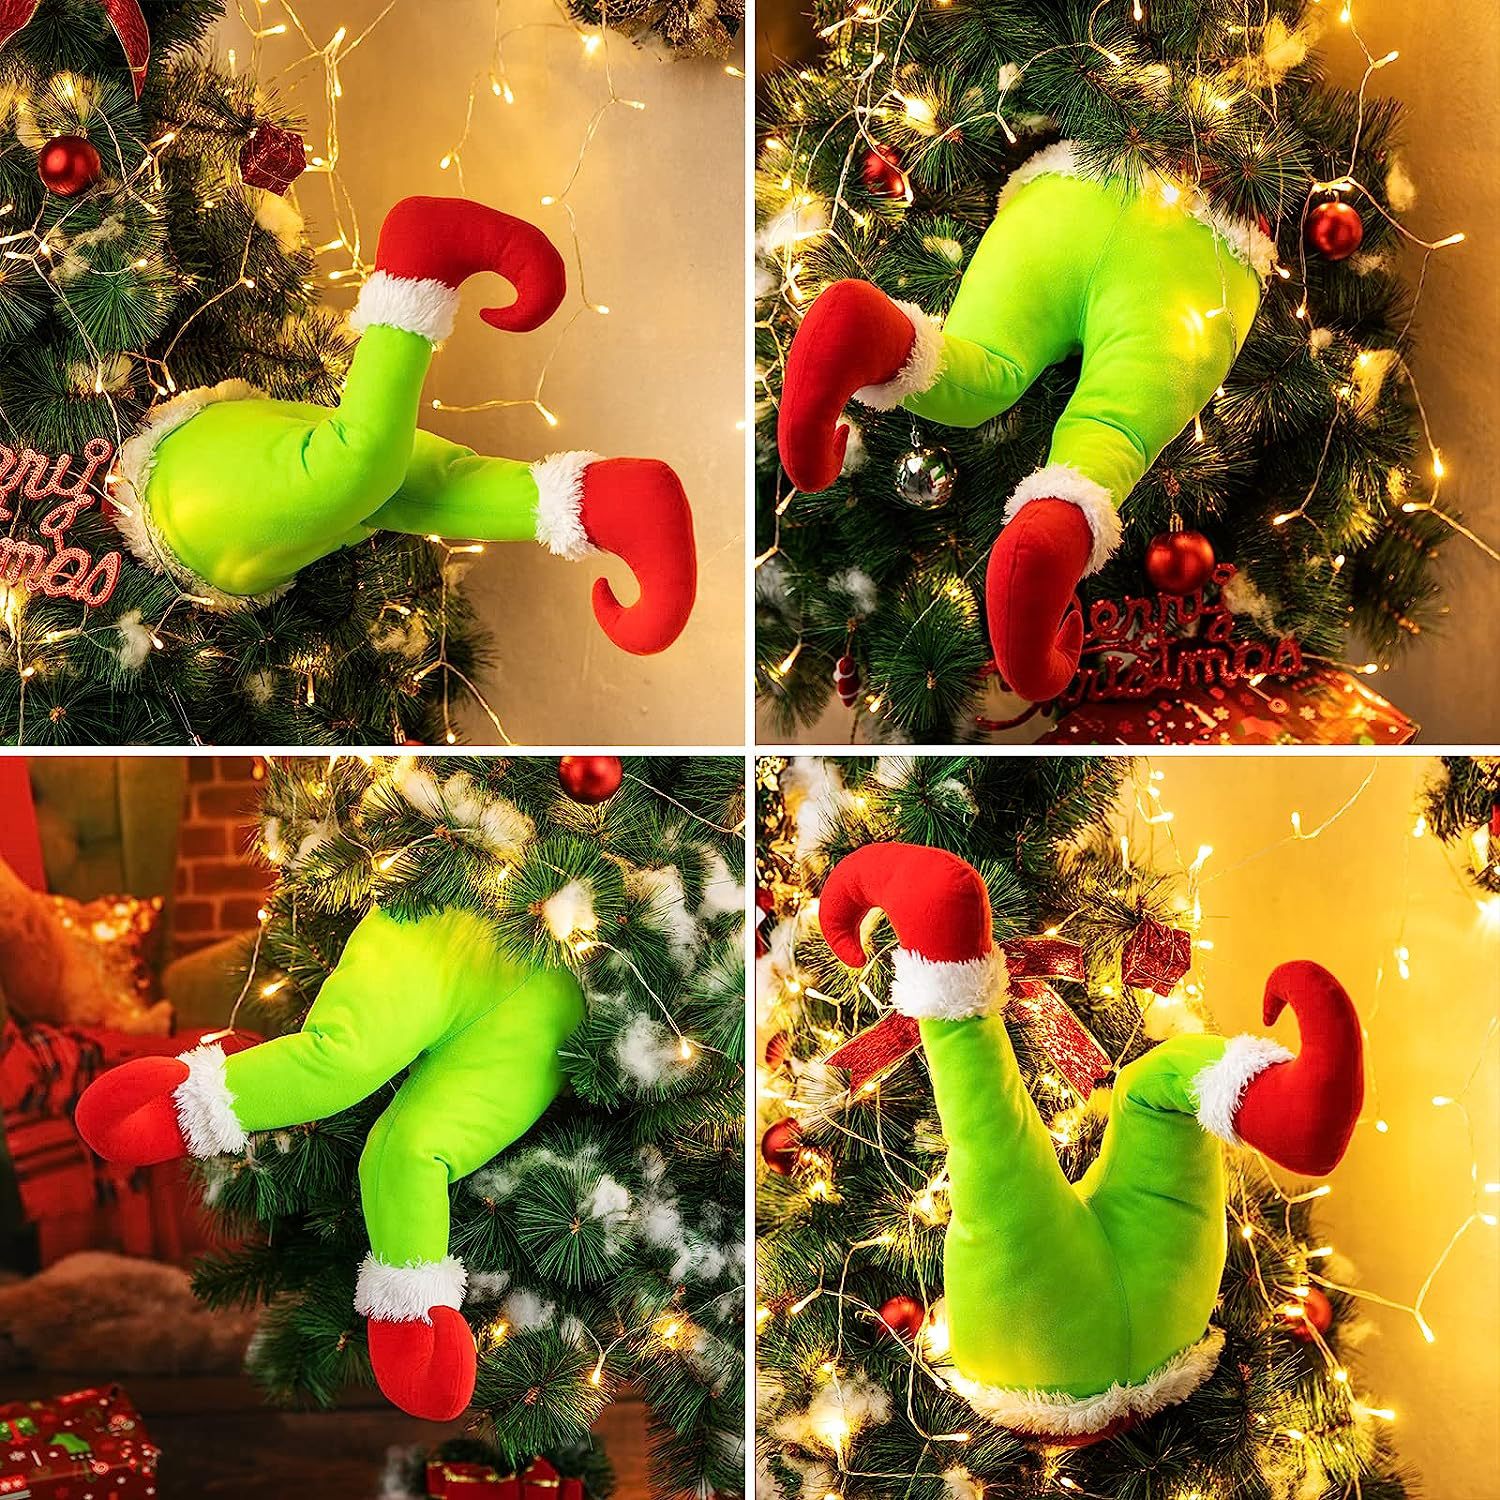 Grinch Christmas Decorations, Grinch Christmas Tree India